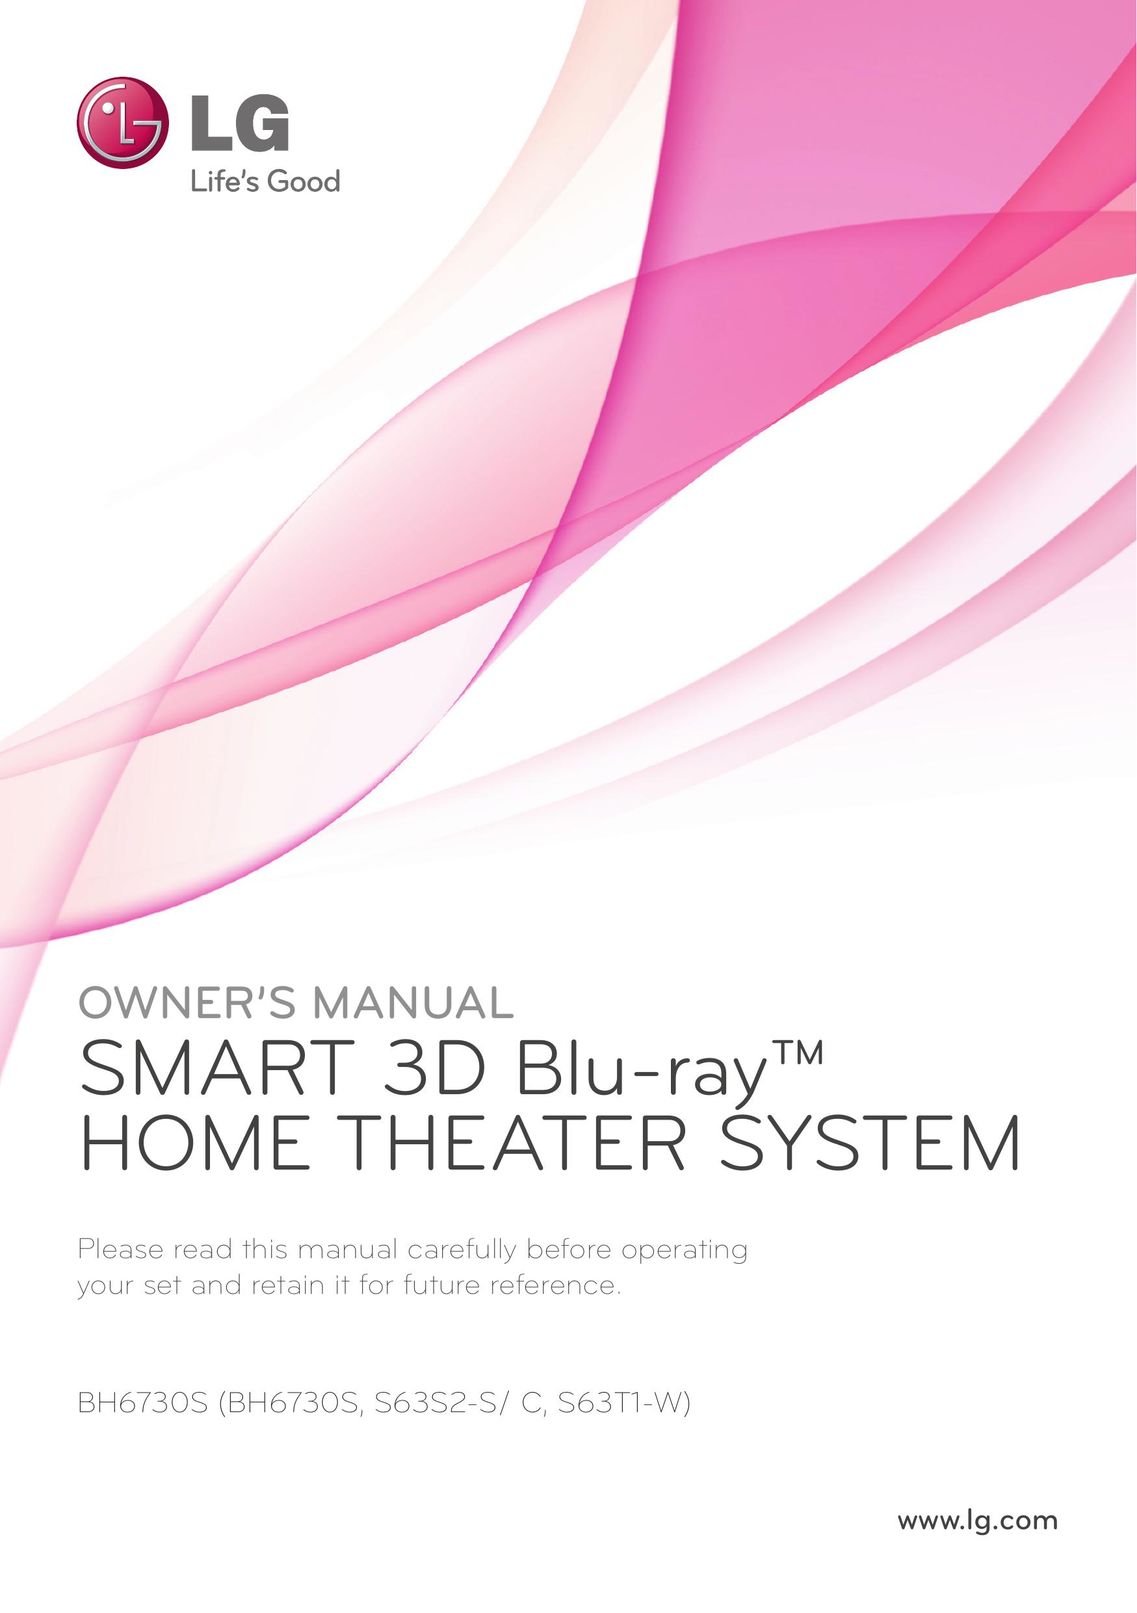 LG Electronics S63S2-S/C Home Theater System User Manual